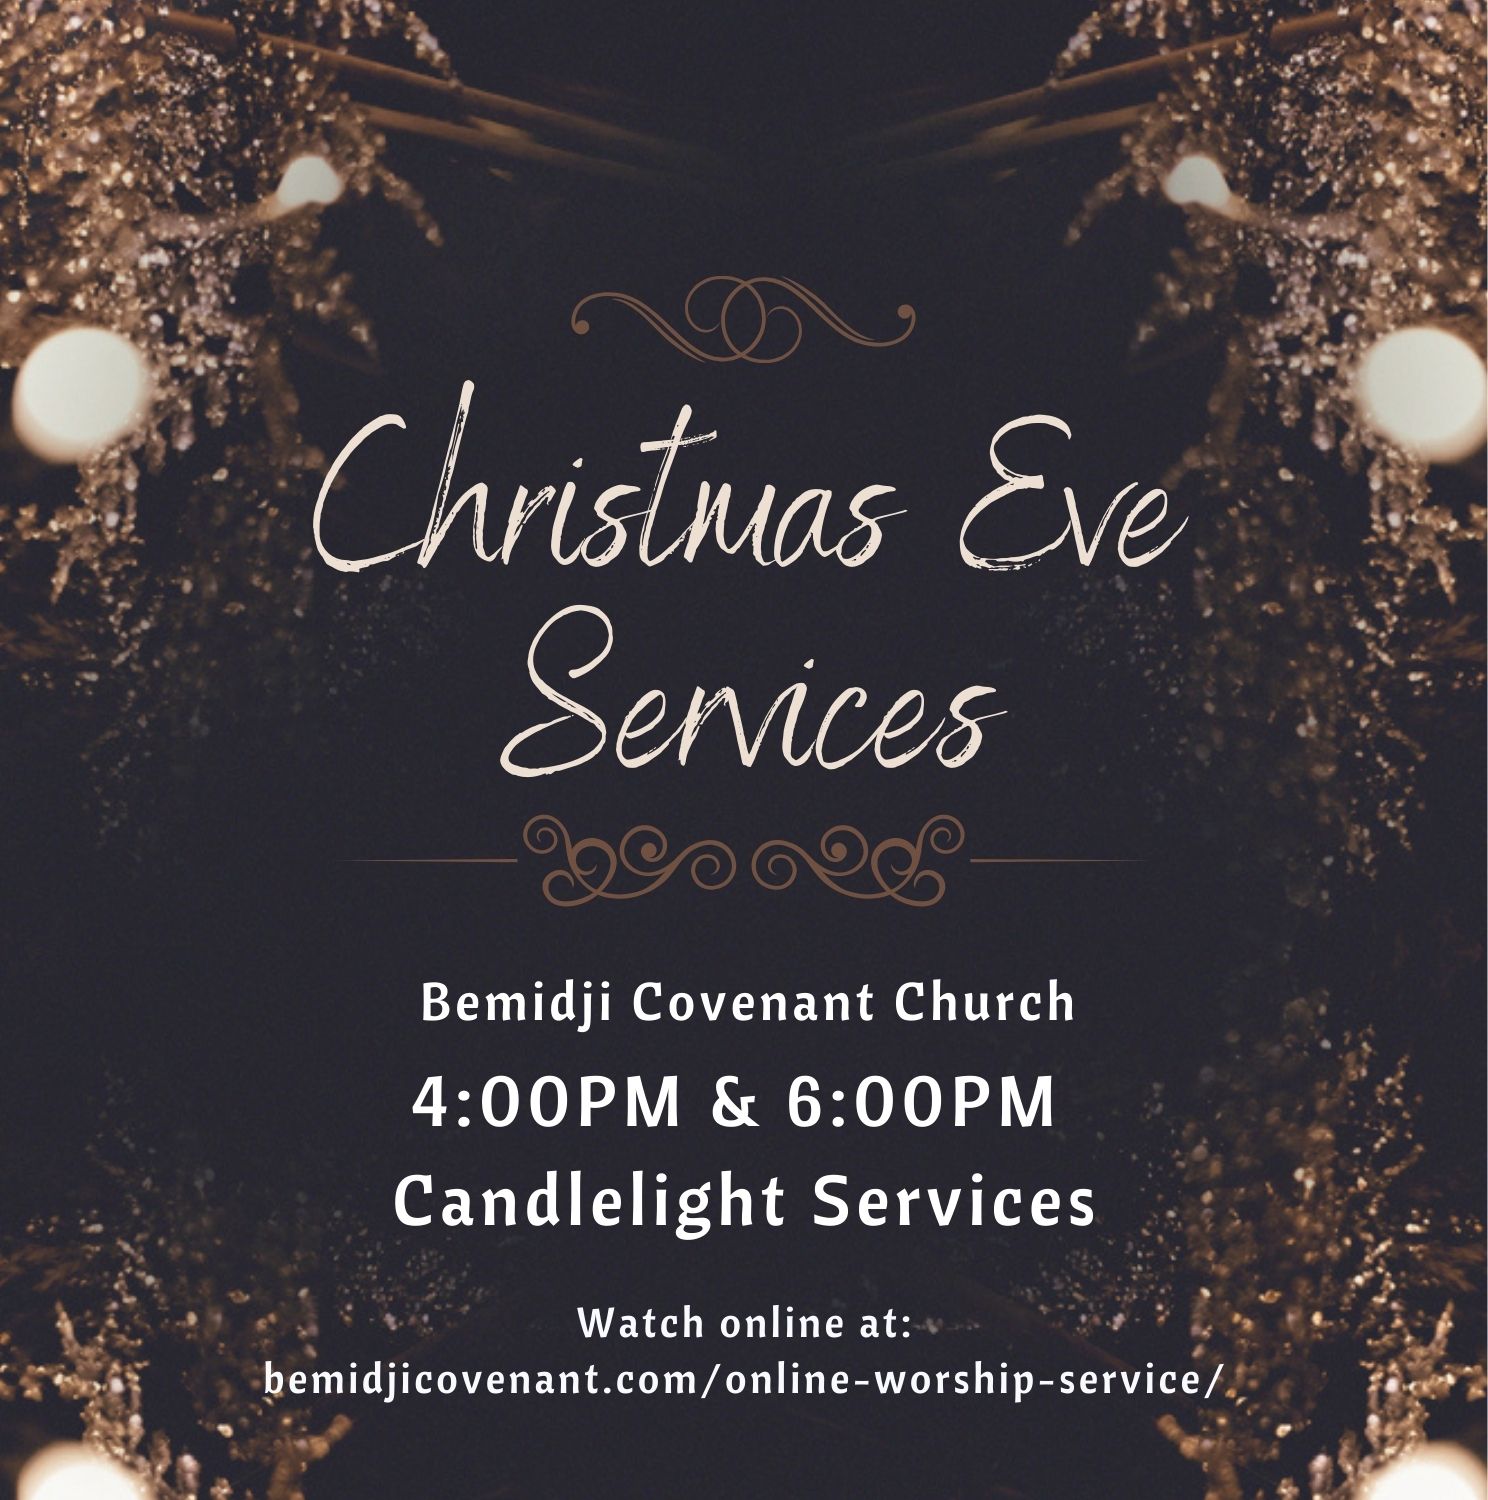 Copy of 2021 Covenant Christmas Eve Ad.